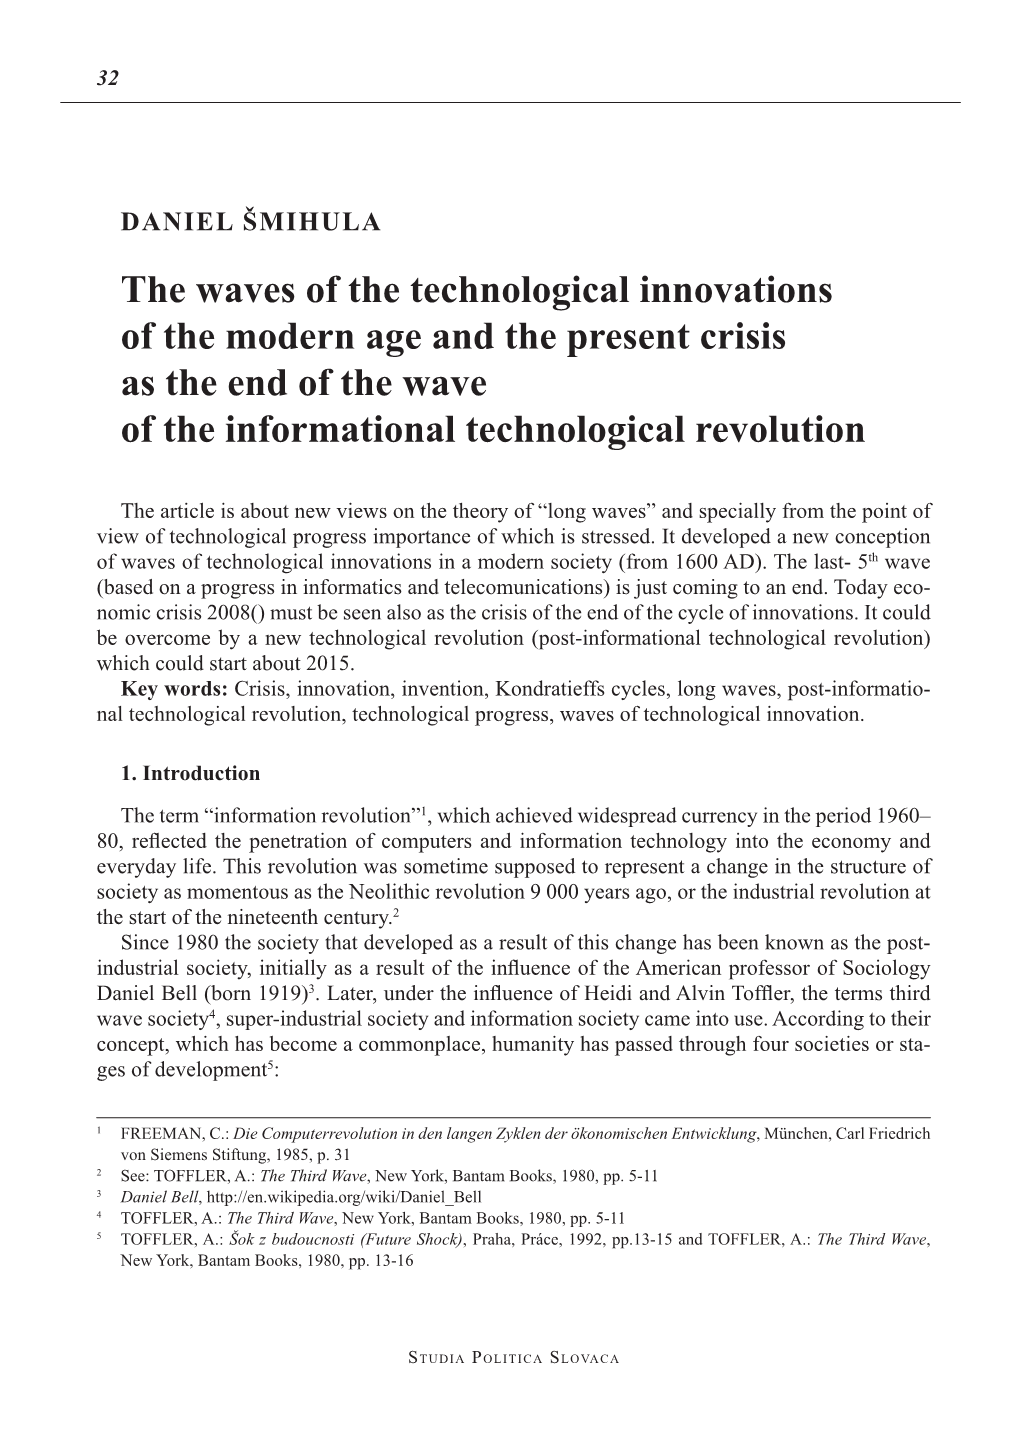 The Waves of the Technological Innovations of the Modern Age and the Present Crisis As the End of the Wave of the Informational Technological Revolution